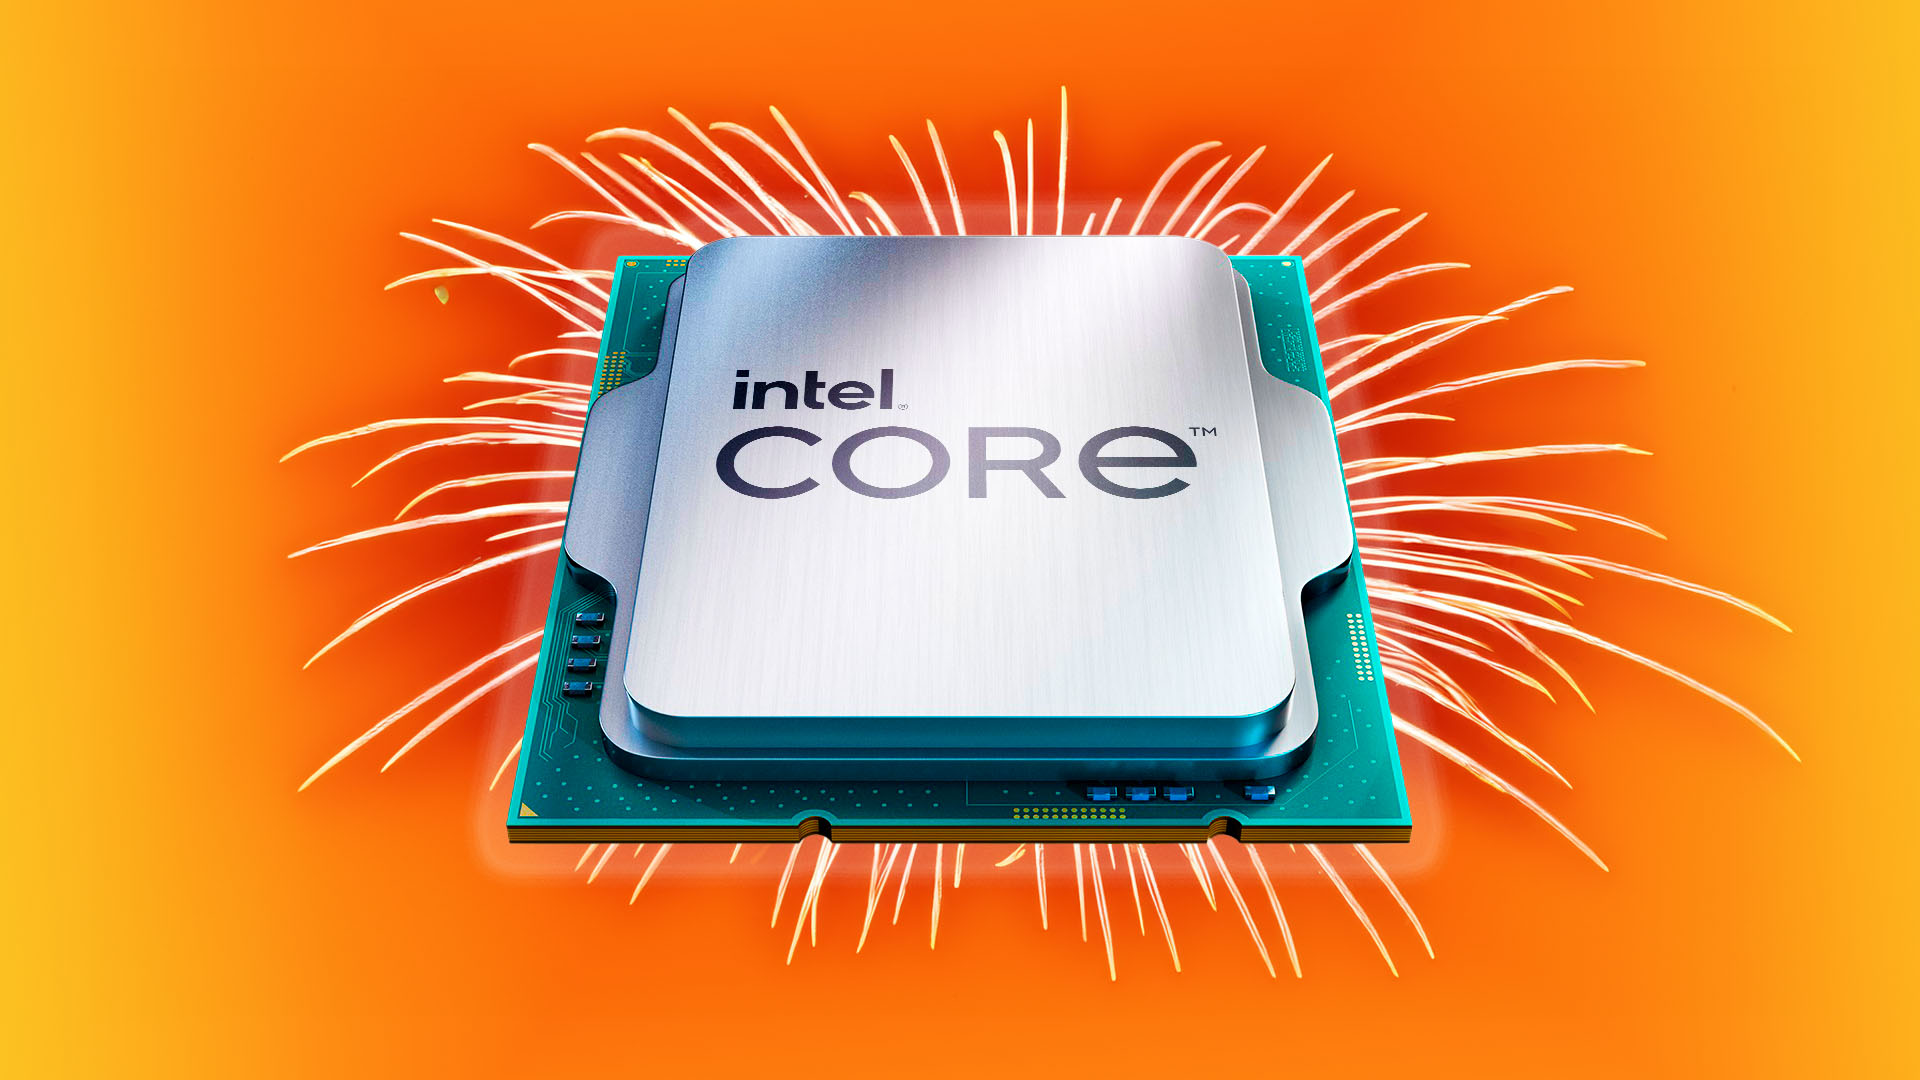 Grab an Intel Core i7 CPU for just $209.98 in this limited time deal